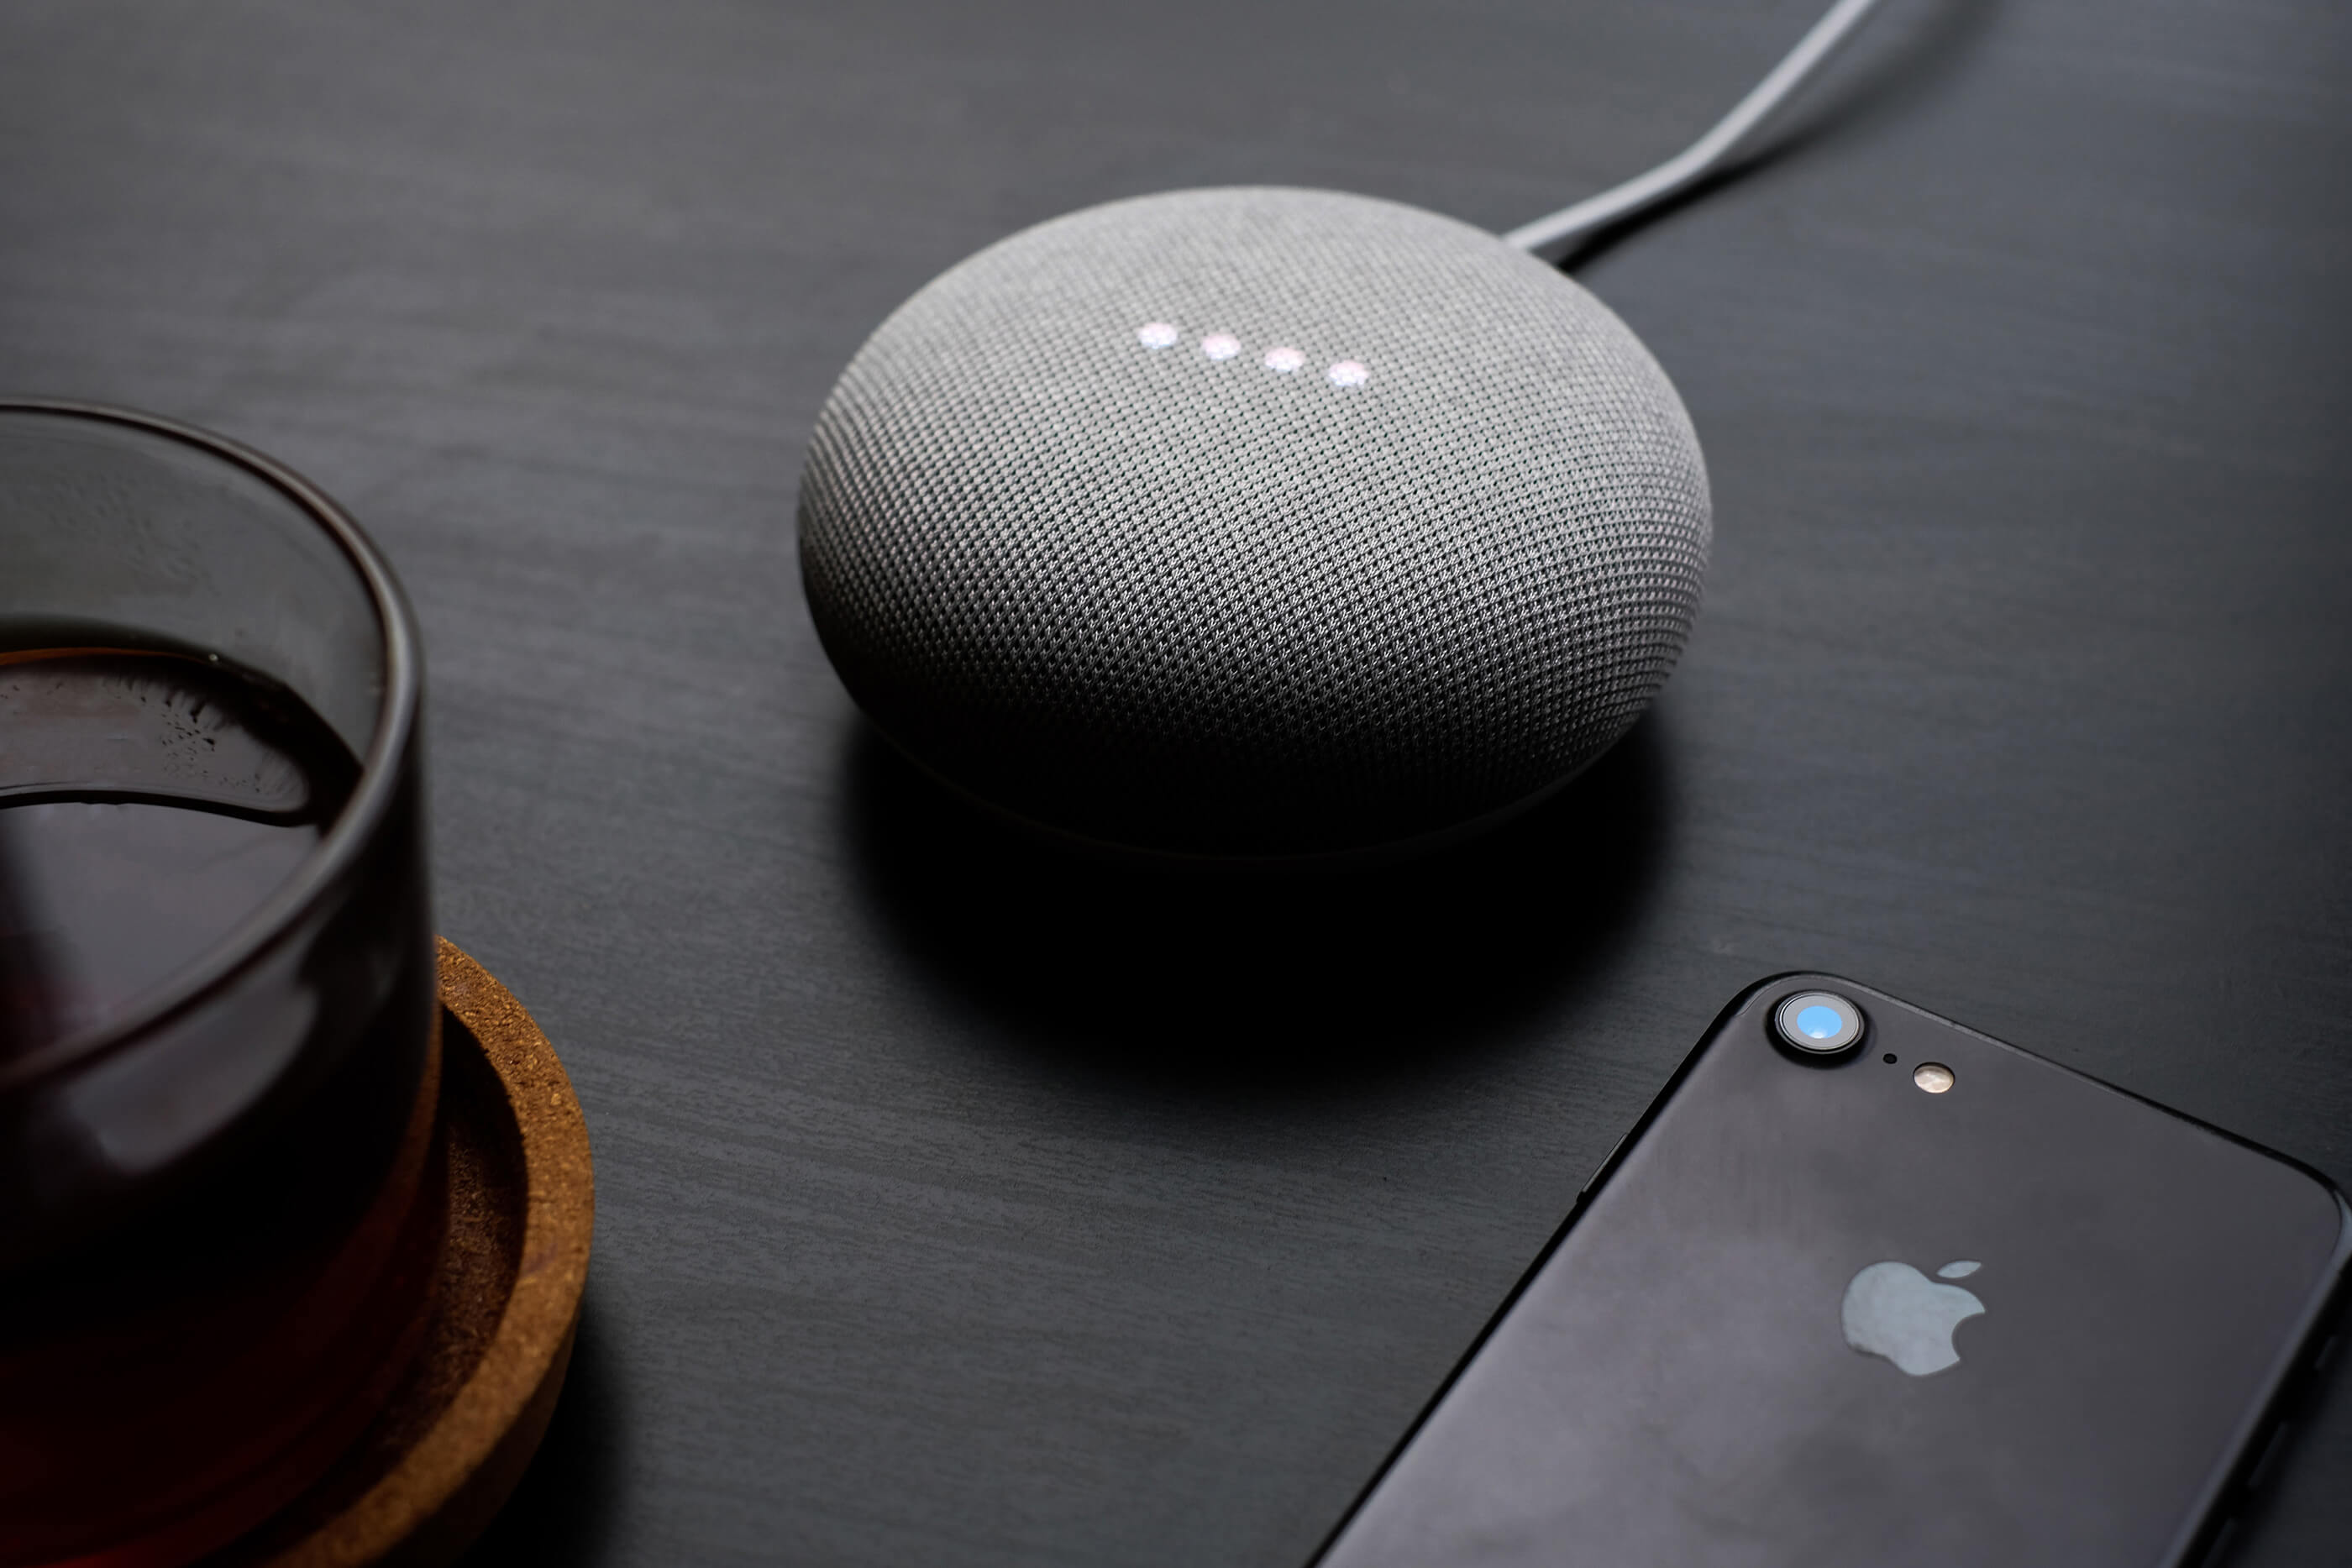 Opinion: The voice assistant war, what if nobody wins?